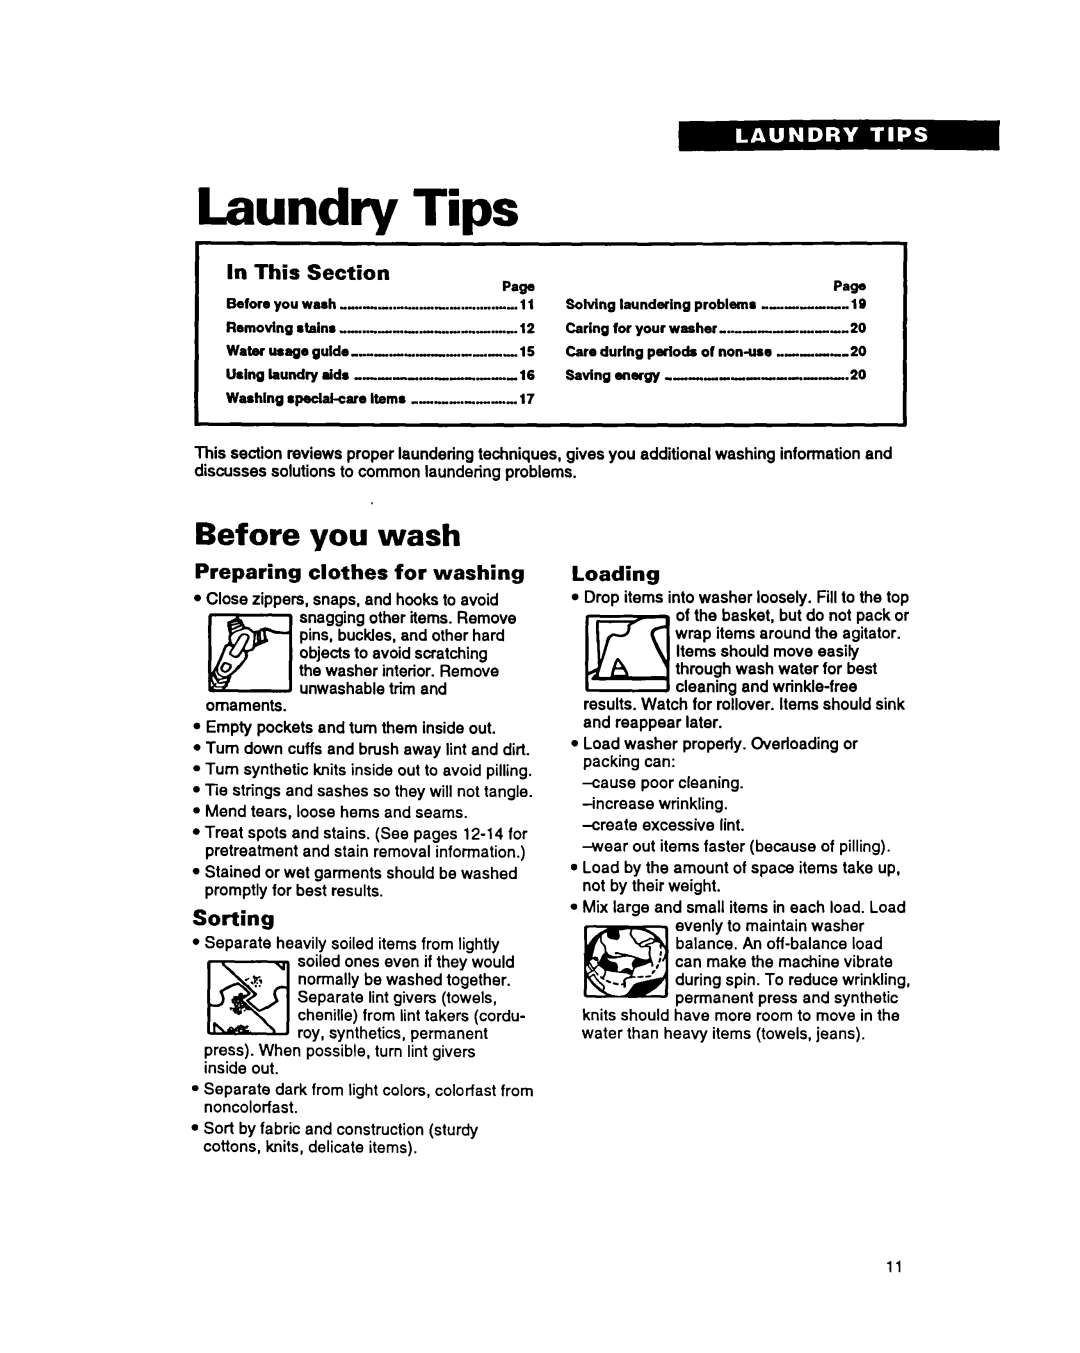 Whirlpool RAM5243A Tips, Laundry, Before you wash, Preparing clothes for washing, Sorting, Loading, In This, Section 